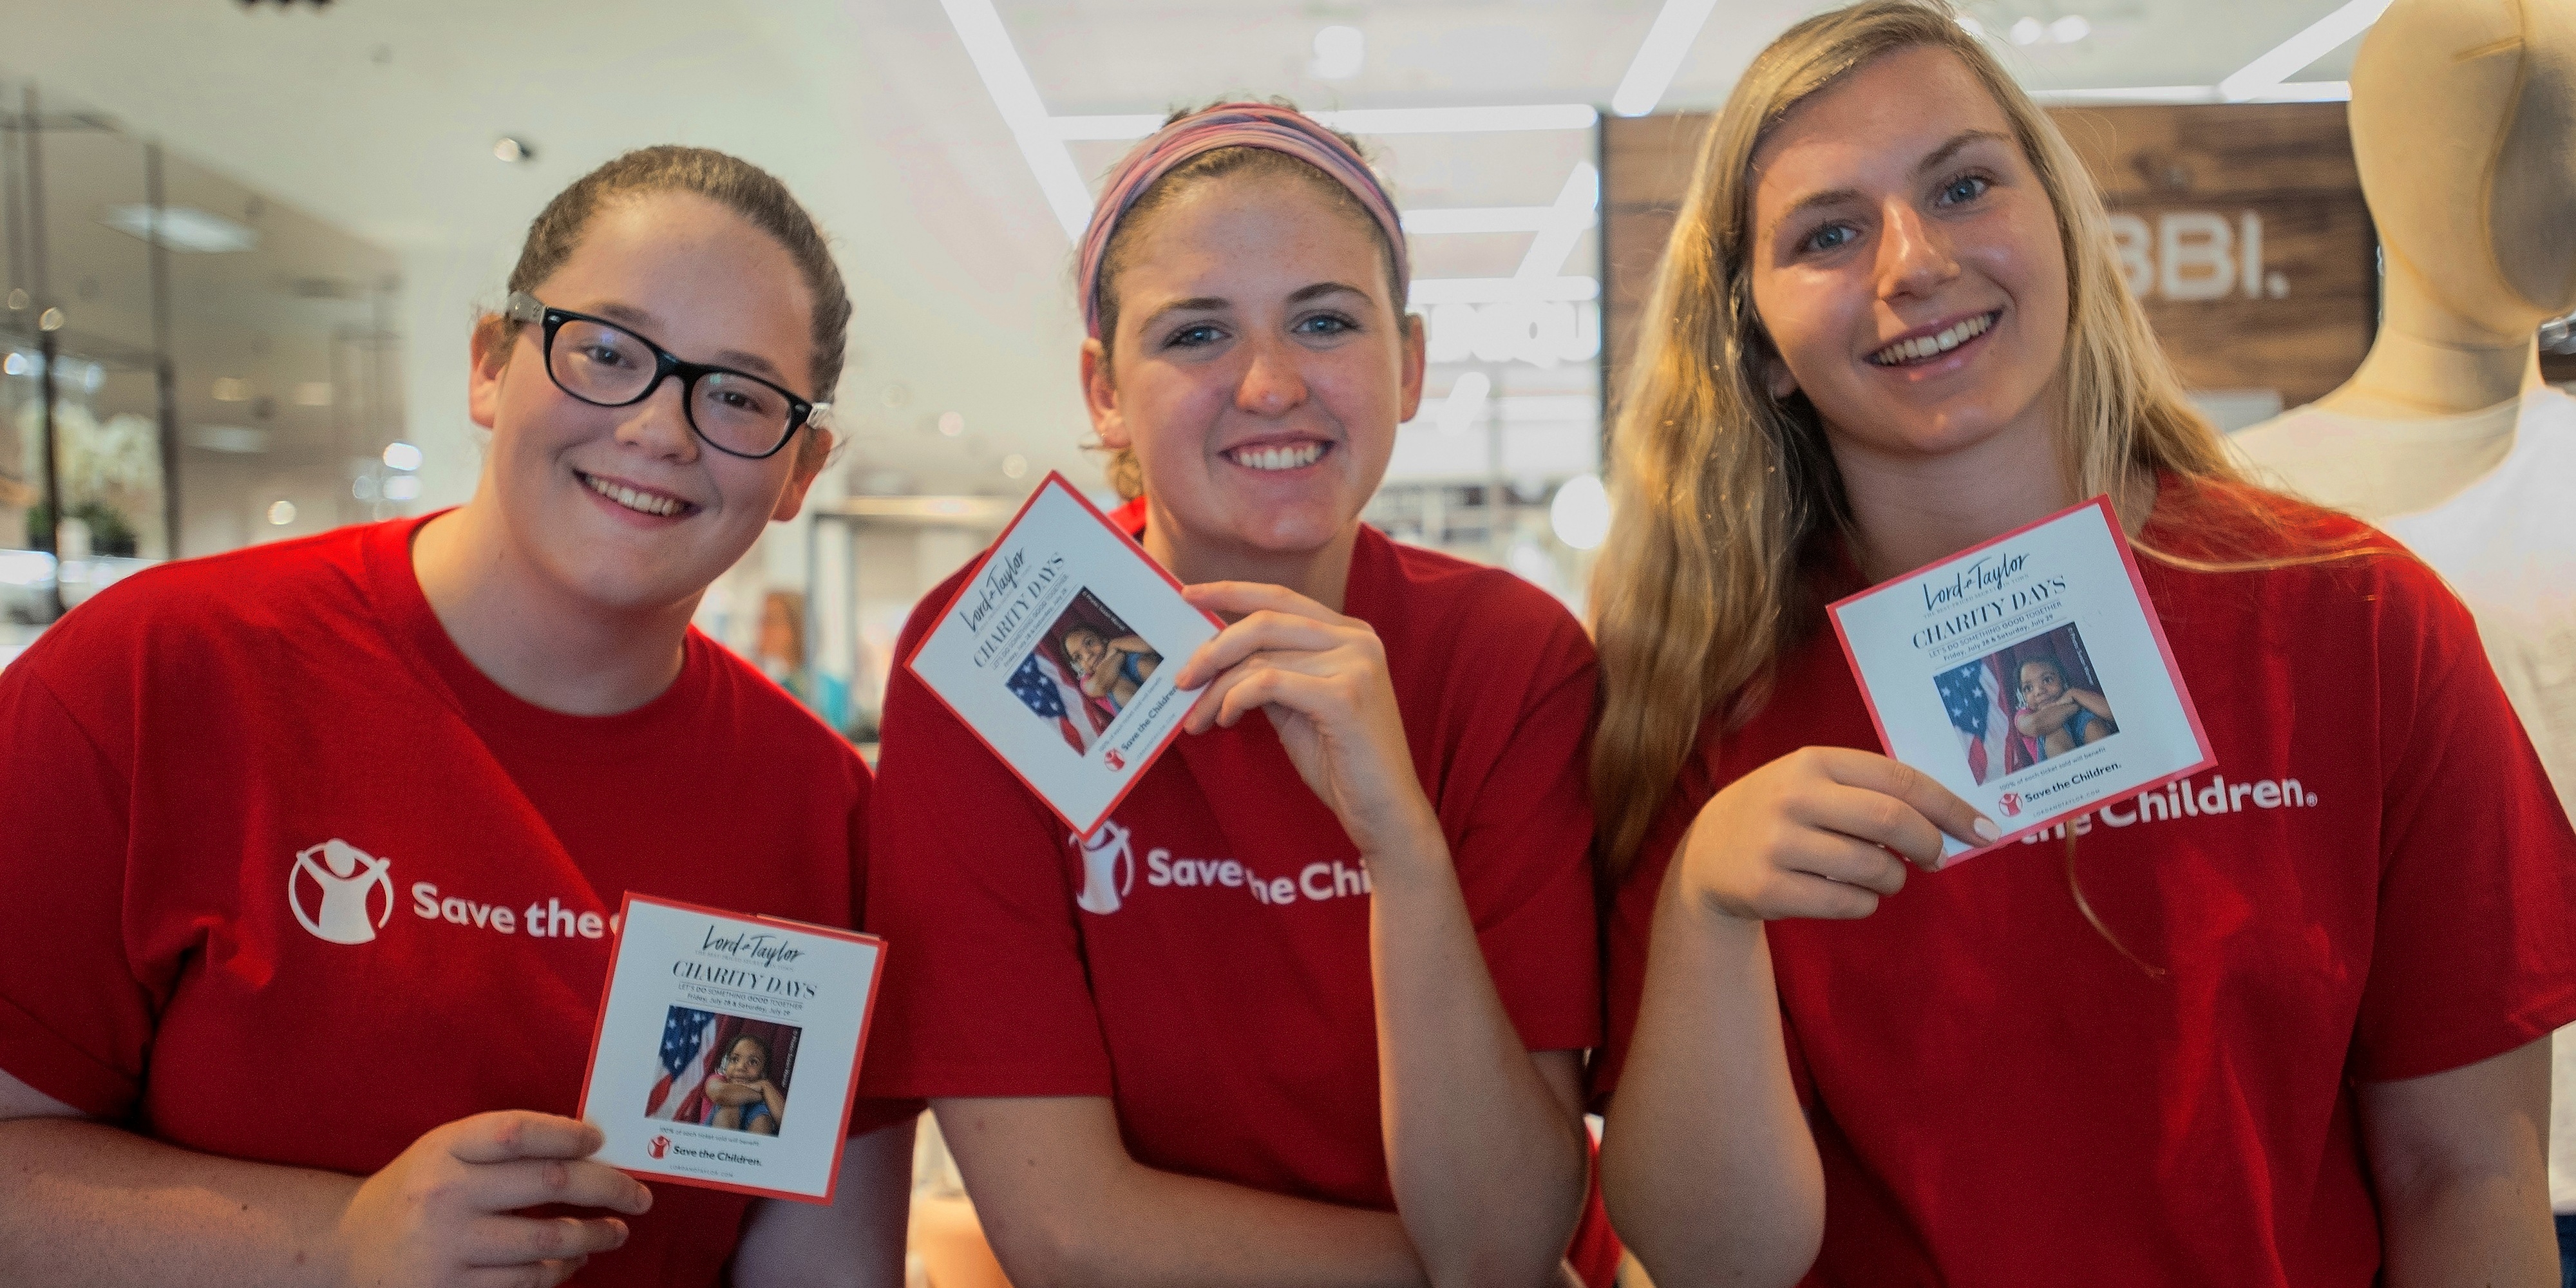 Three volunteers wearing red Save the Children shirts and holding campaign cards gather together at a Save the Children store event.